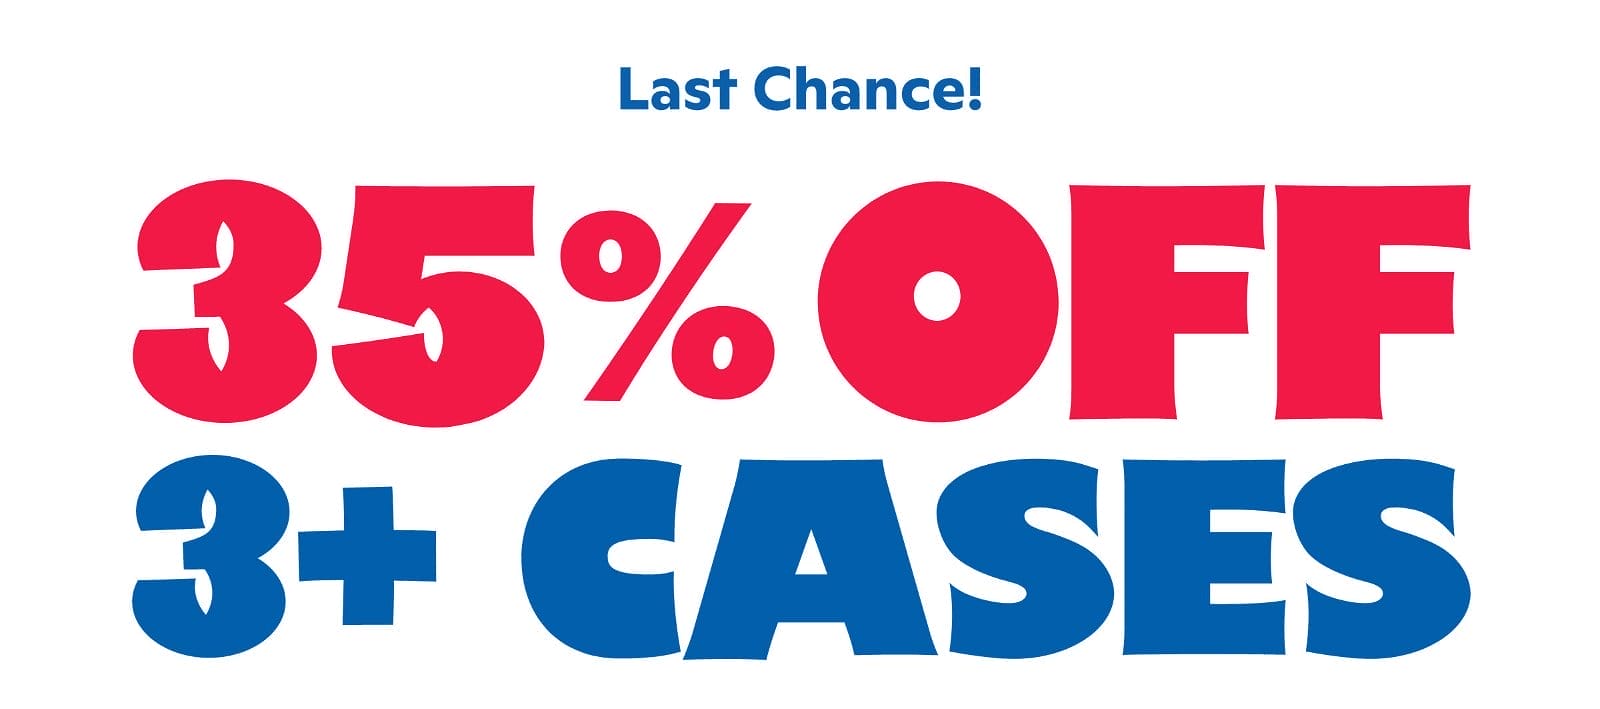 Last chance! 35% off 3+ Cases